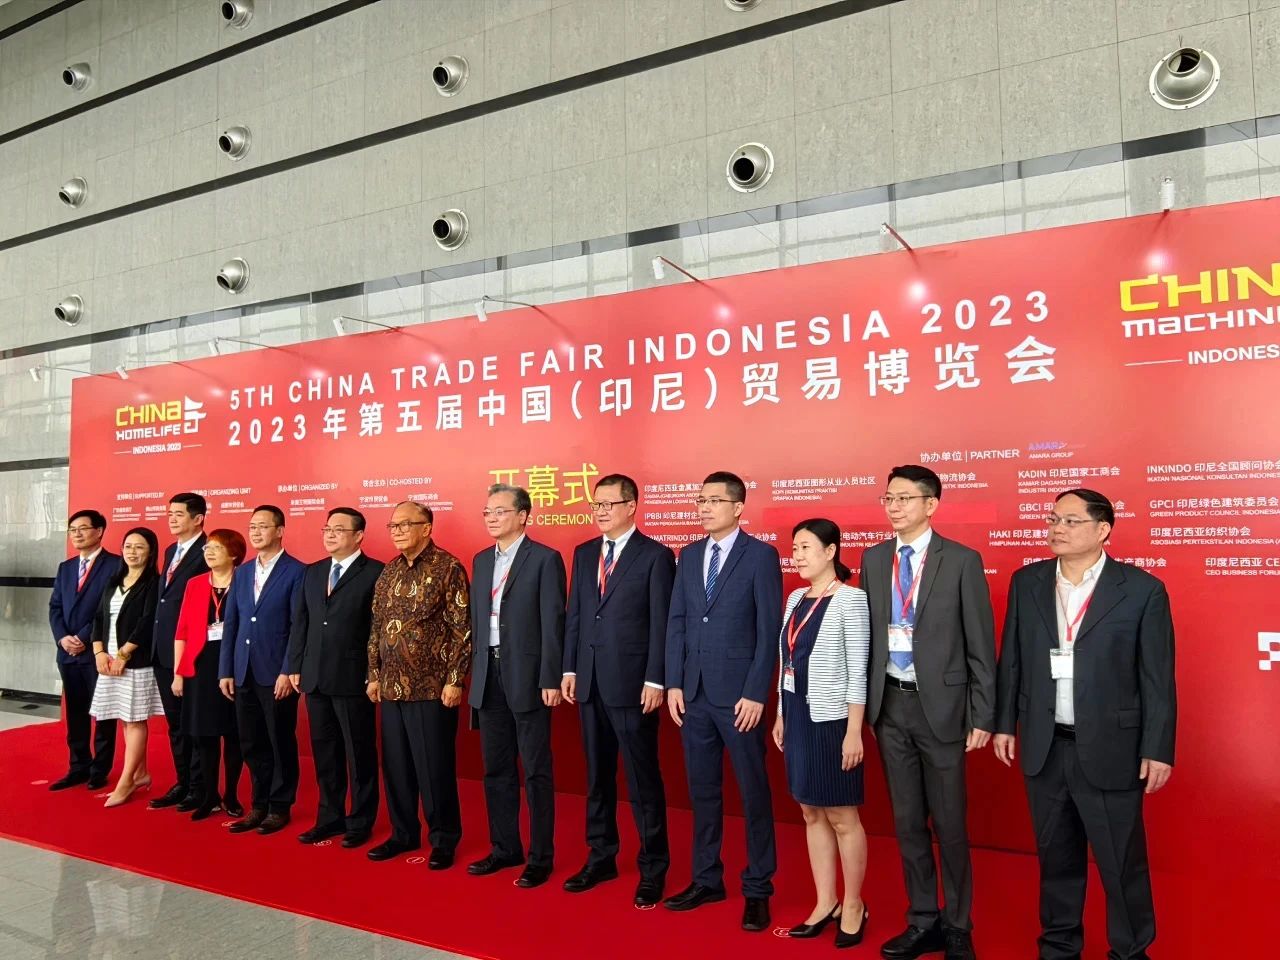 Electric vehicles enliven China expo in Indonesia